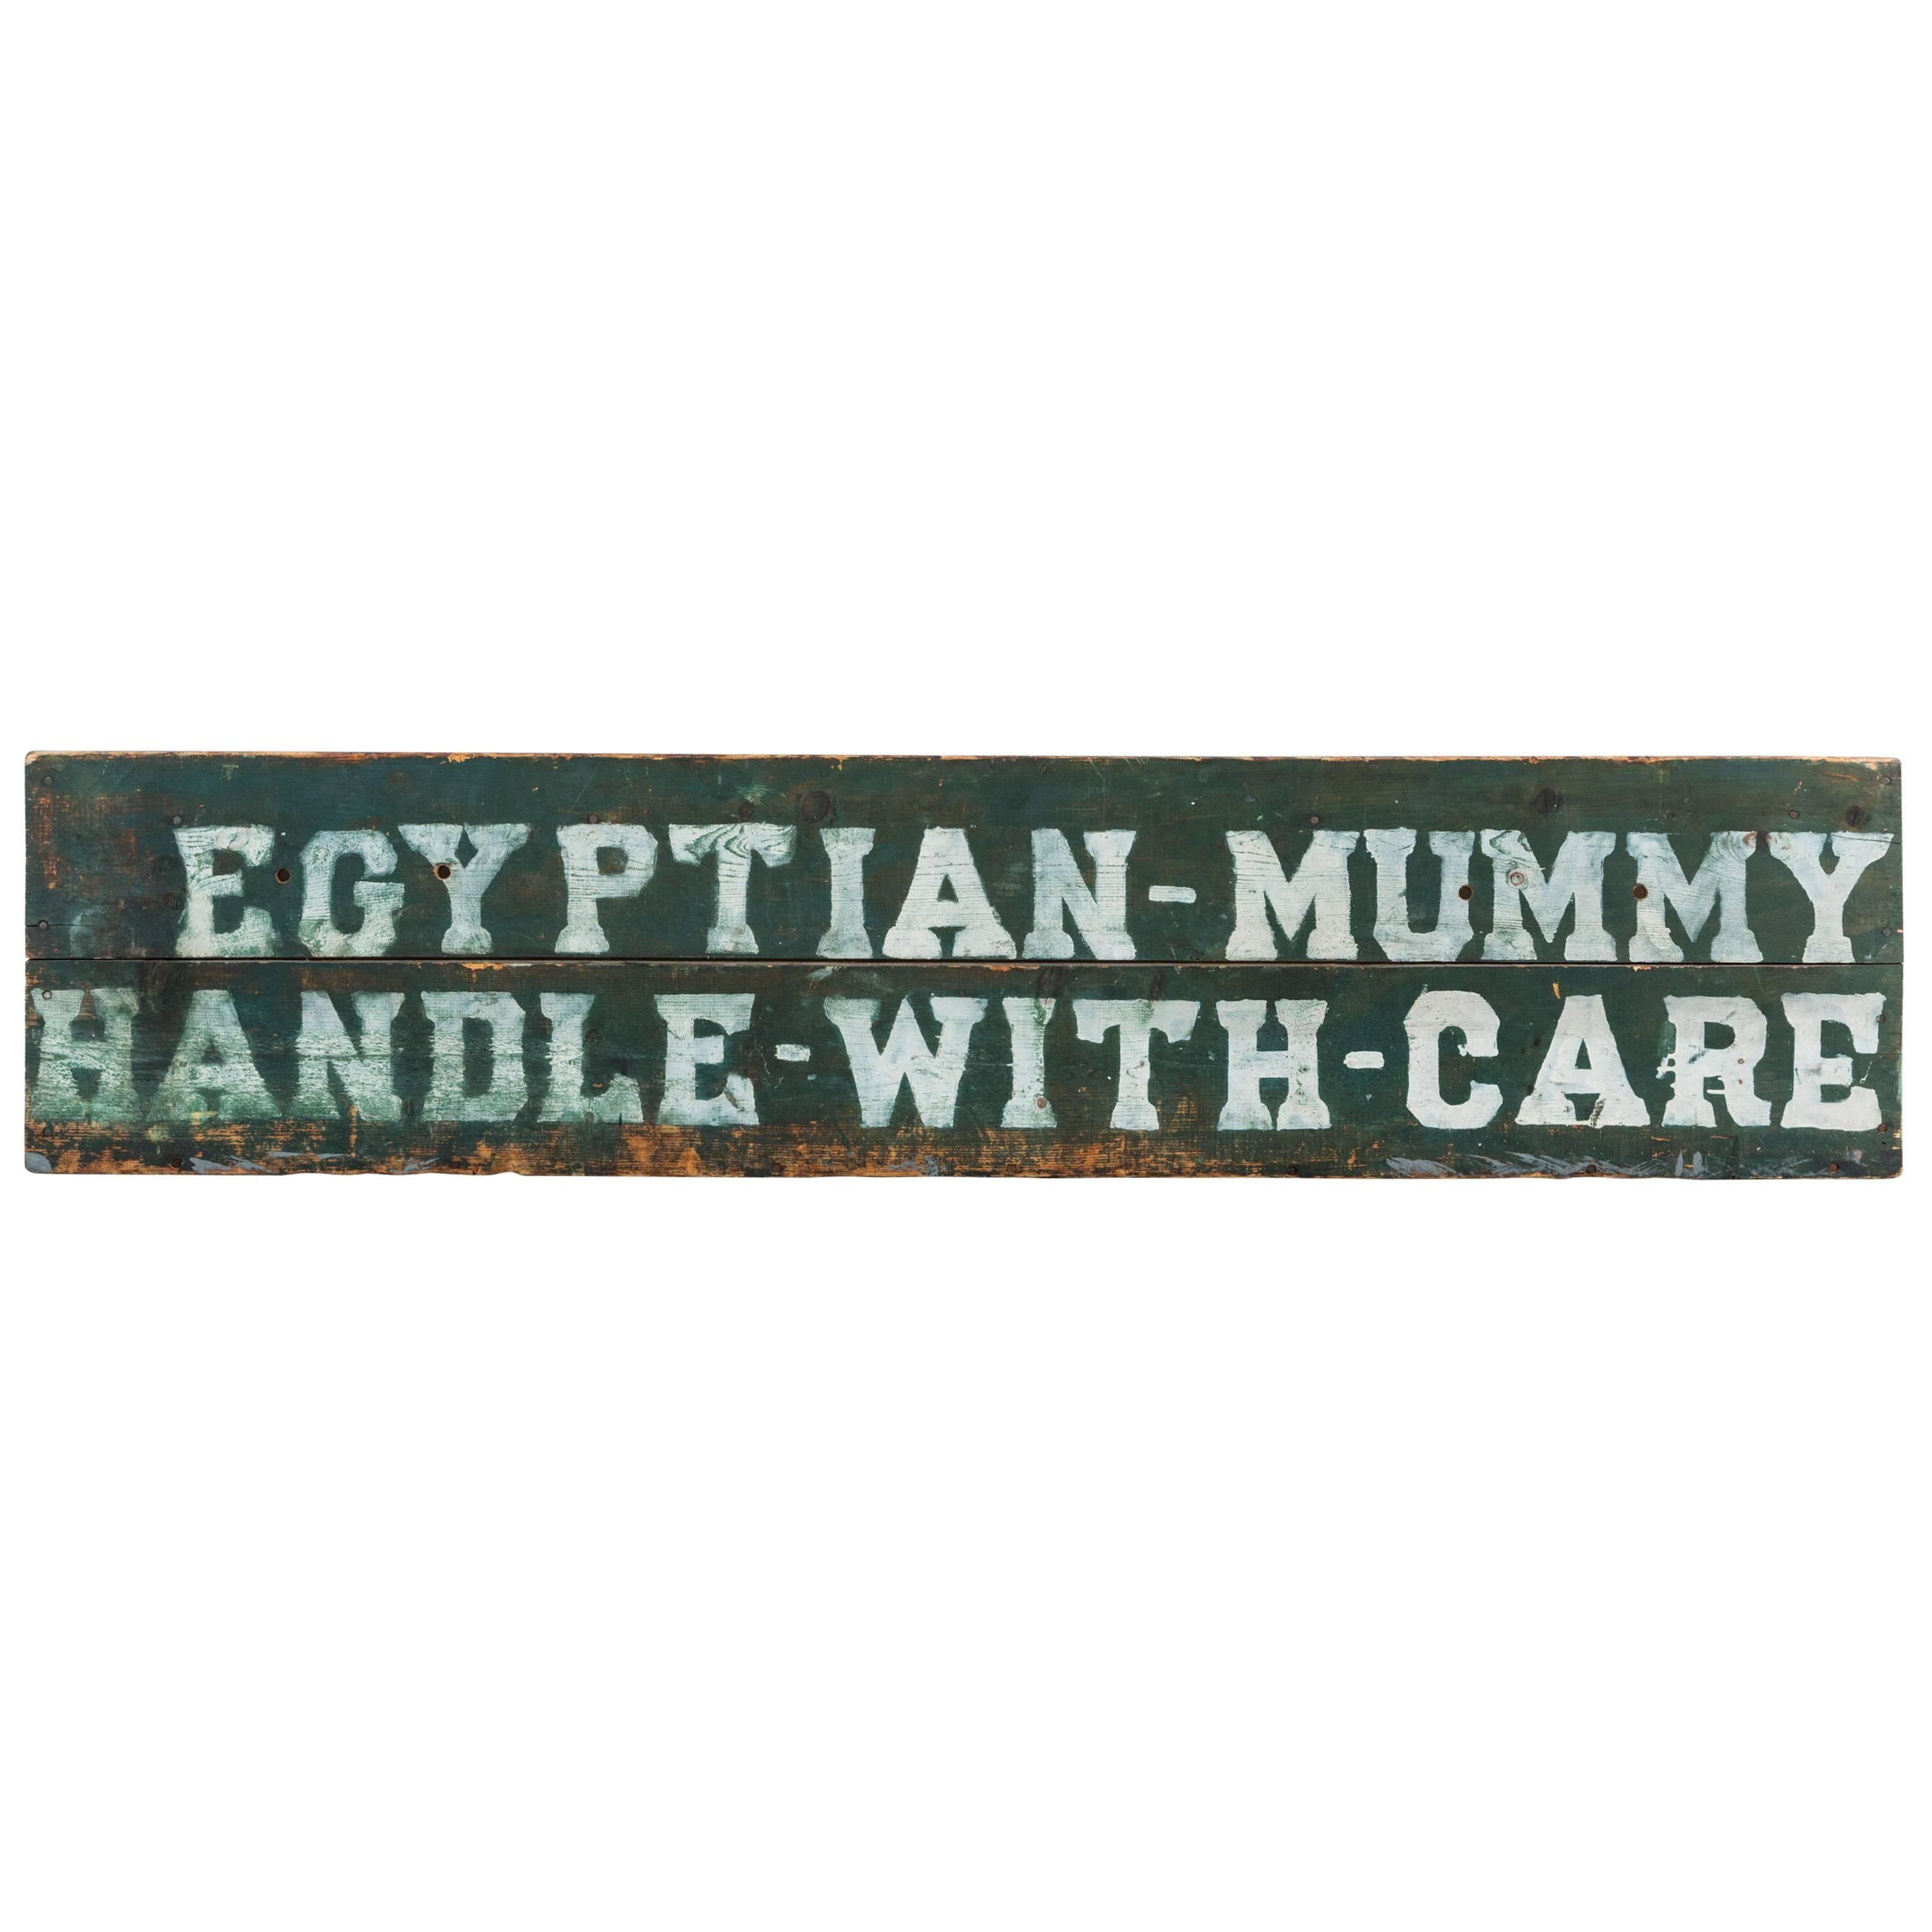 Early Carnival Midway Sideshow or Circus Prop Sign Egyptian Mummy Crate